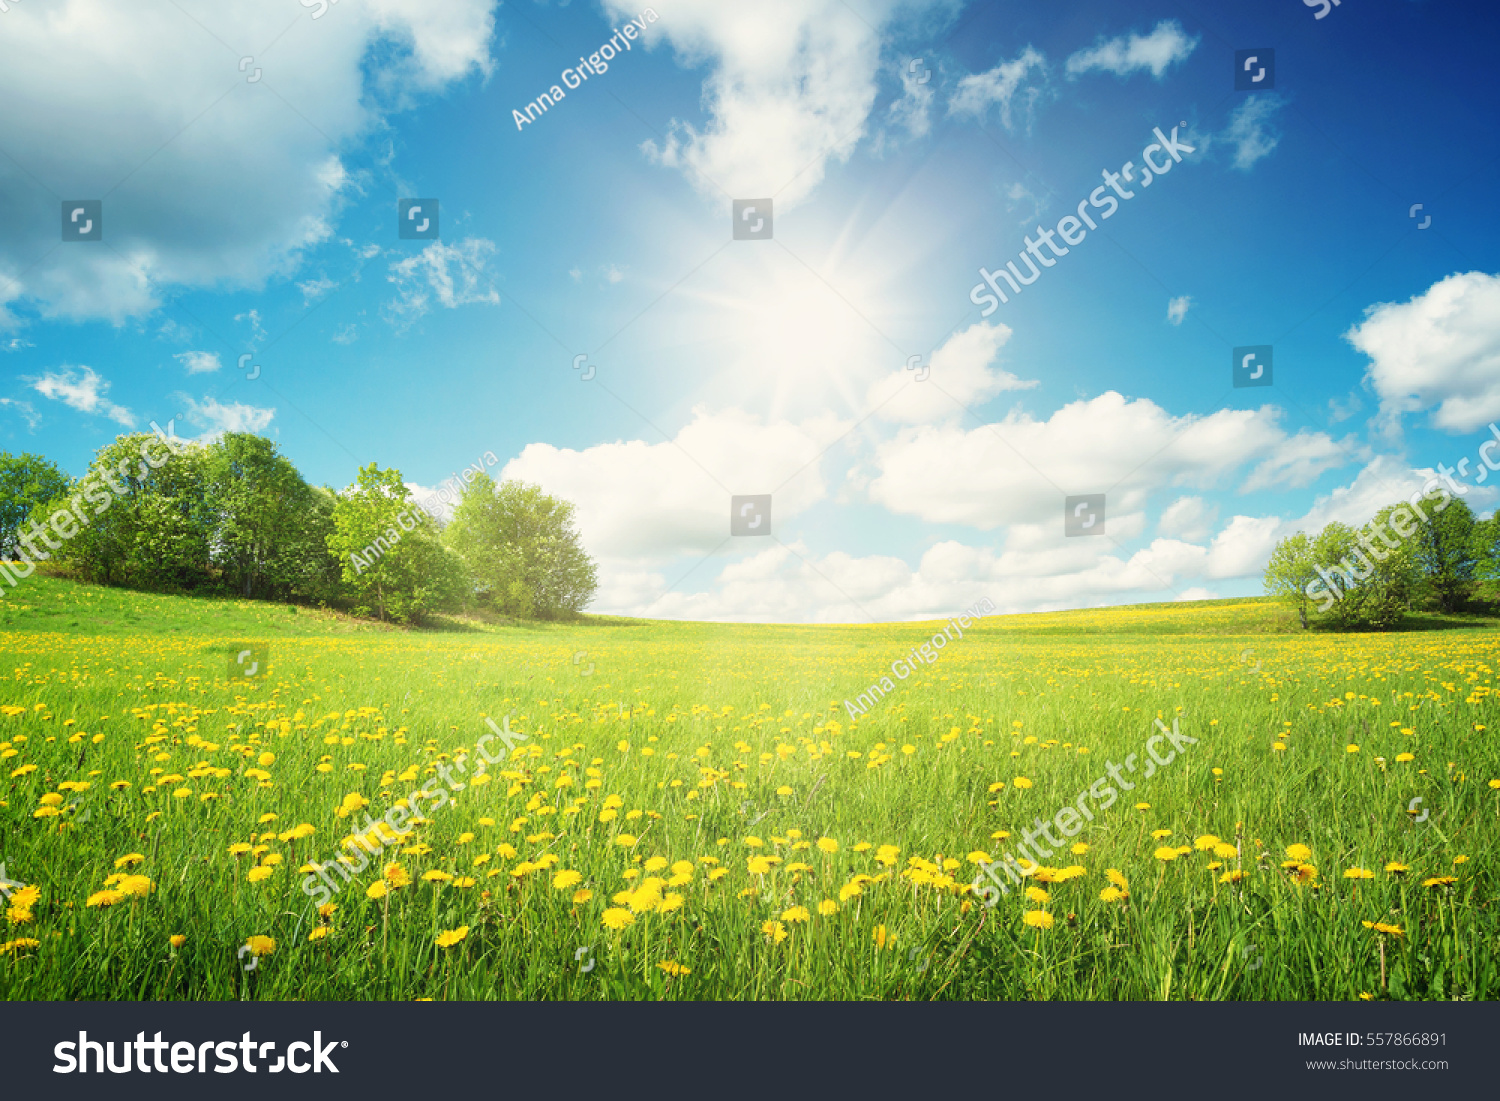 Field with yellow dandelions and blue sky #557866891